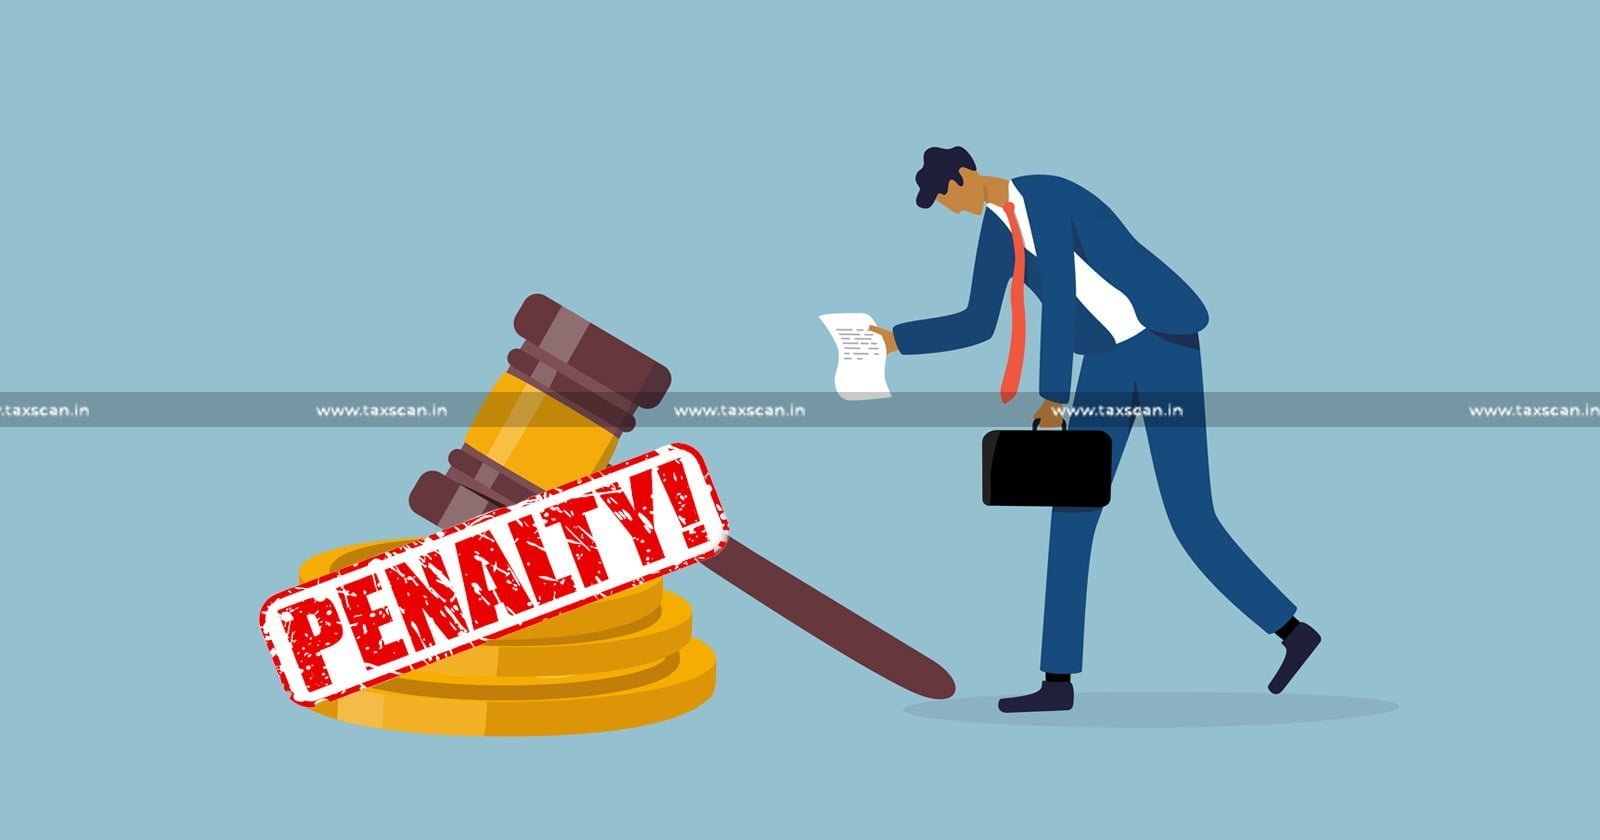 Non-Compliance of Statutory GST Requirements - Non-Compliance - Statutory GST Requirements - GST - GST Requirements - Madras High Court - Penalty - Taxscan